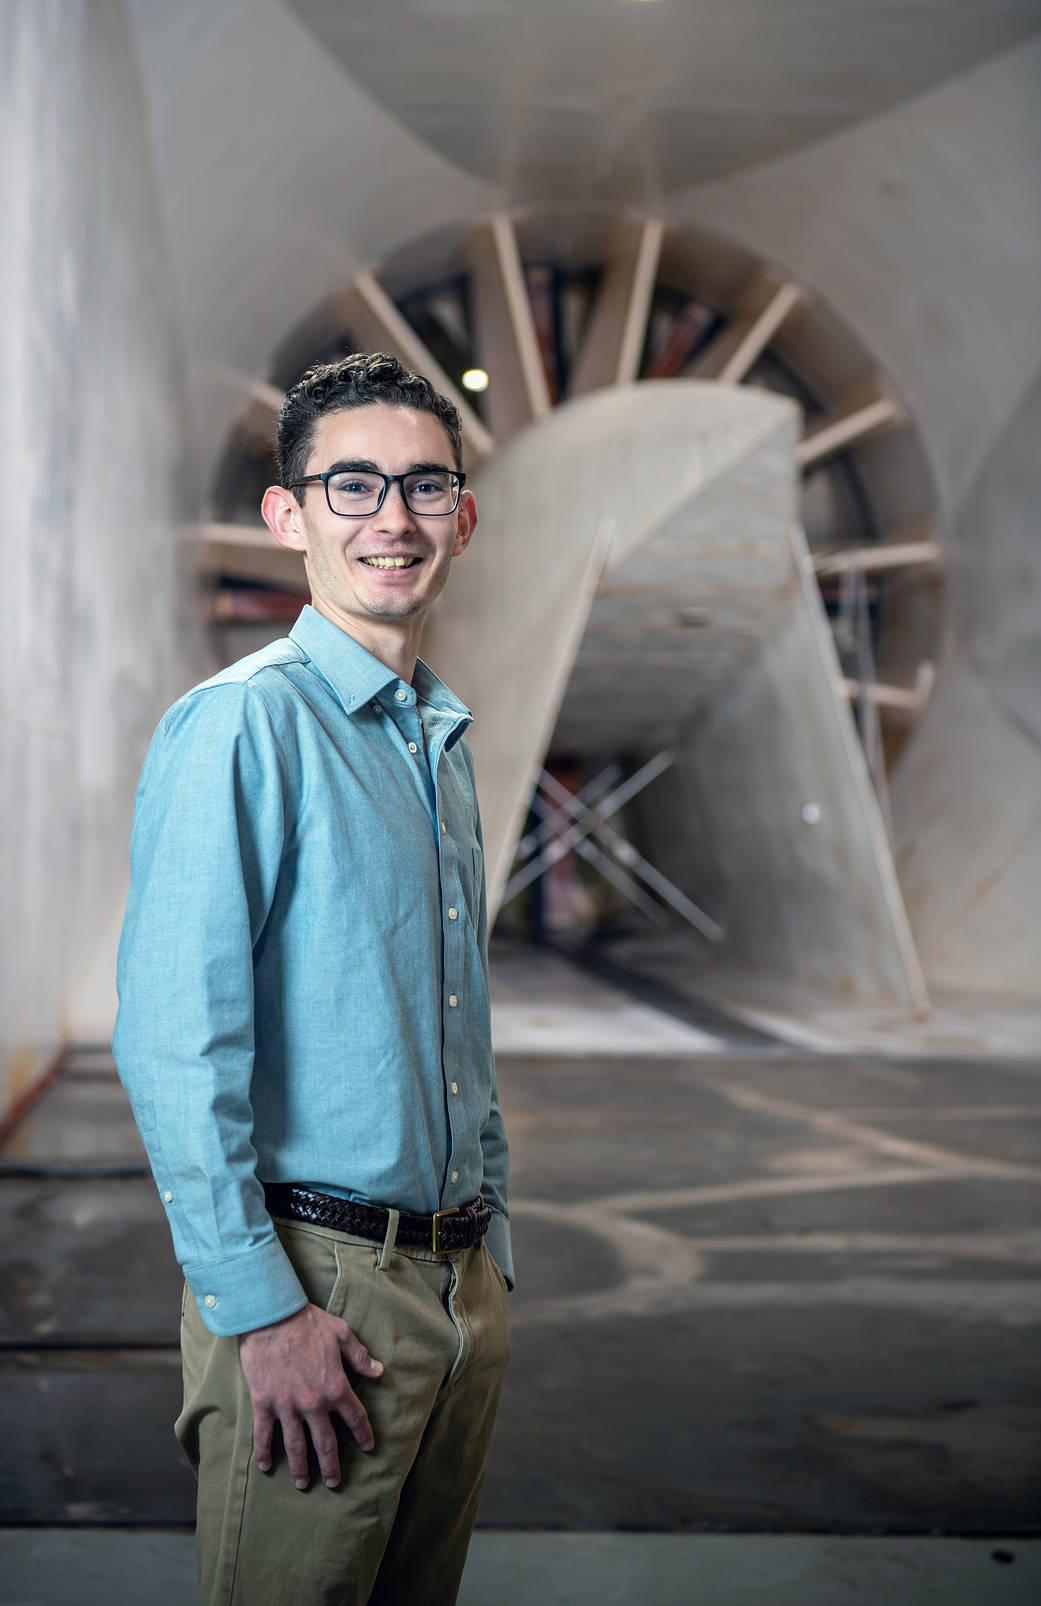 Young man wearing glasses, button-down shirt and khakis smiles at camera in front of massive fan in icing research tunnel facility.